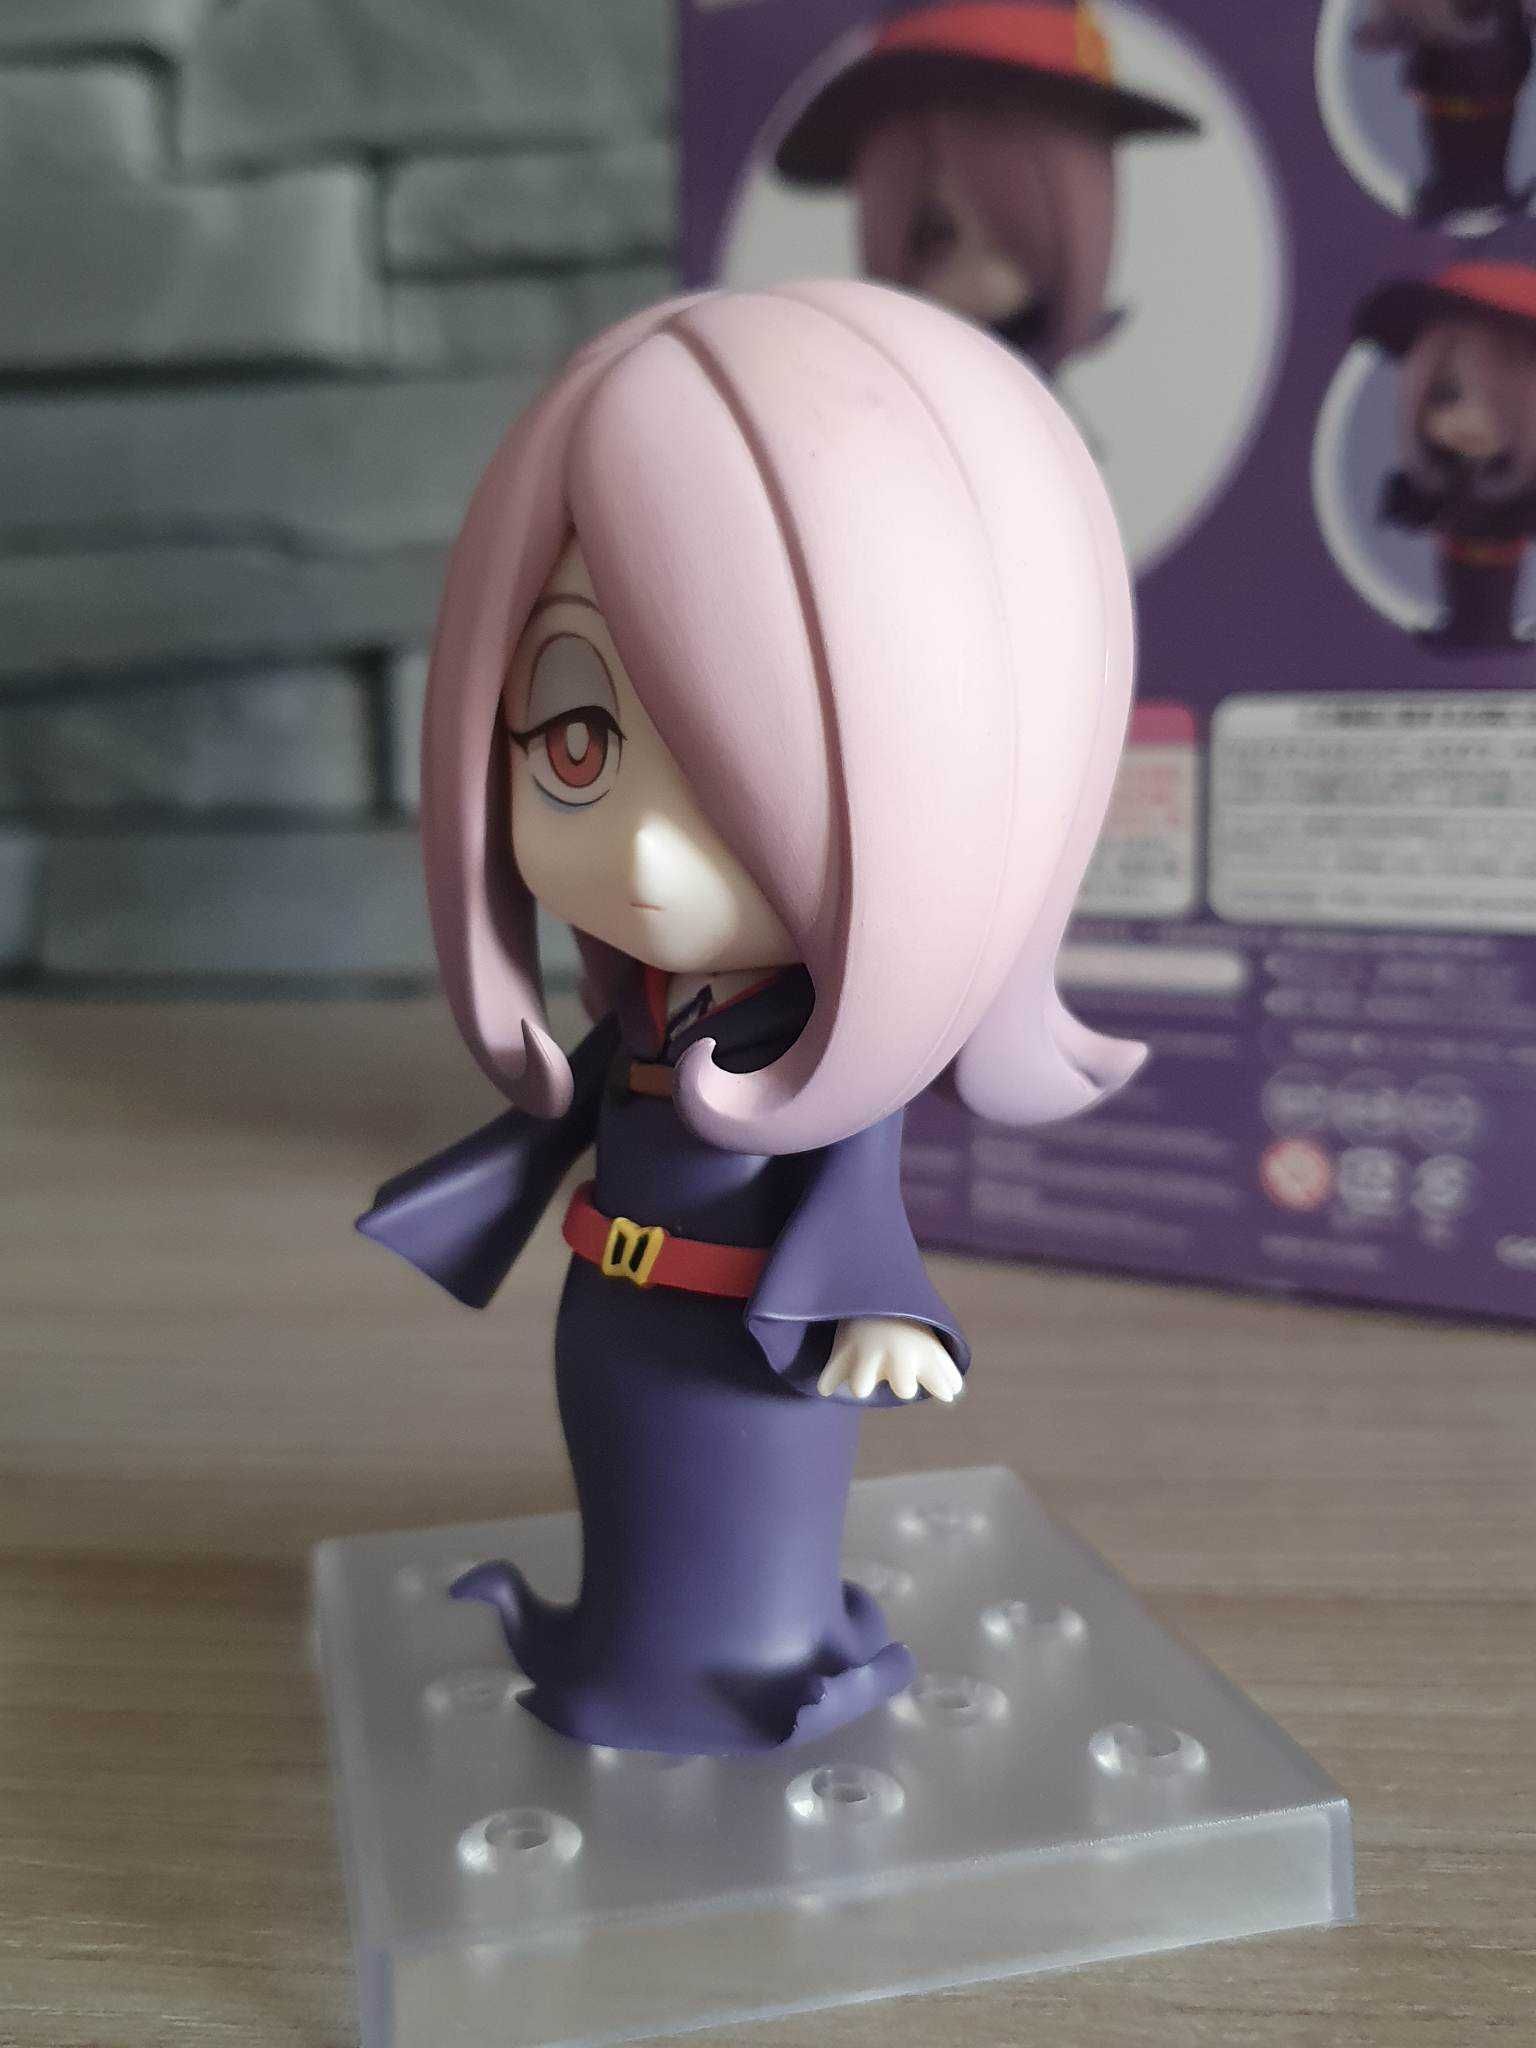 Nendoroid Sucy Little Witch Academia figurka anime